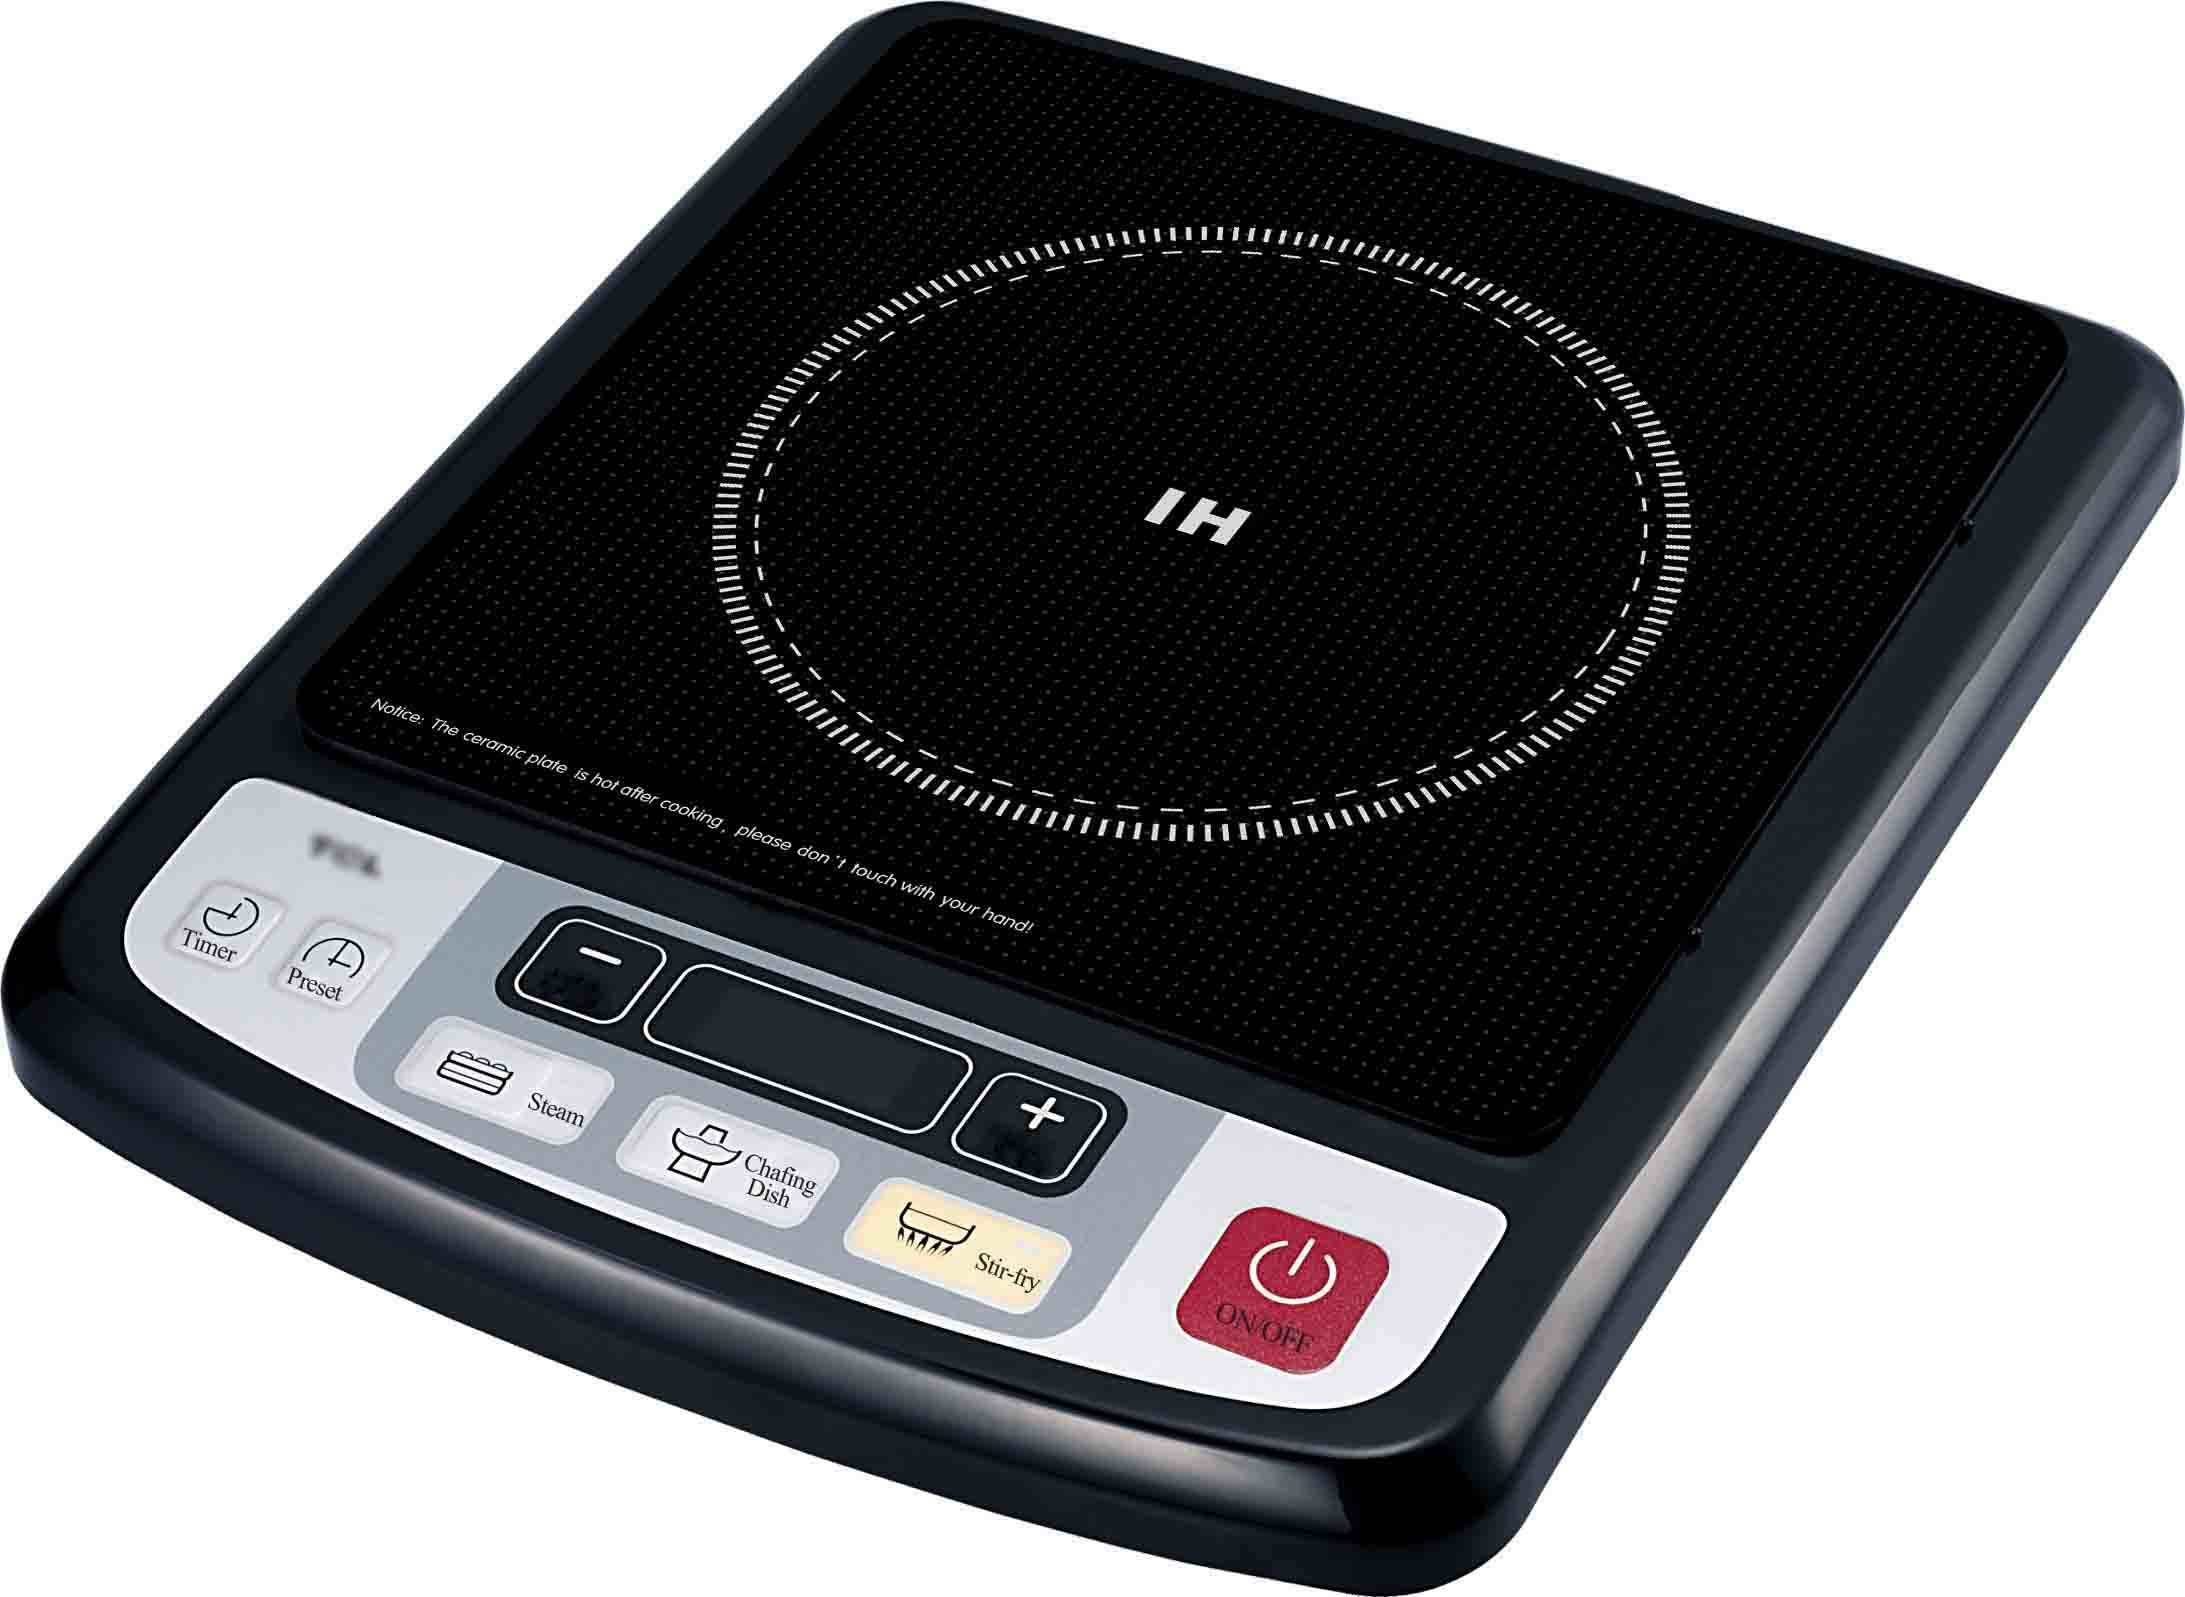 Induction-Cooker-Tch2010.jpg